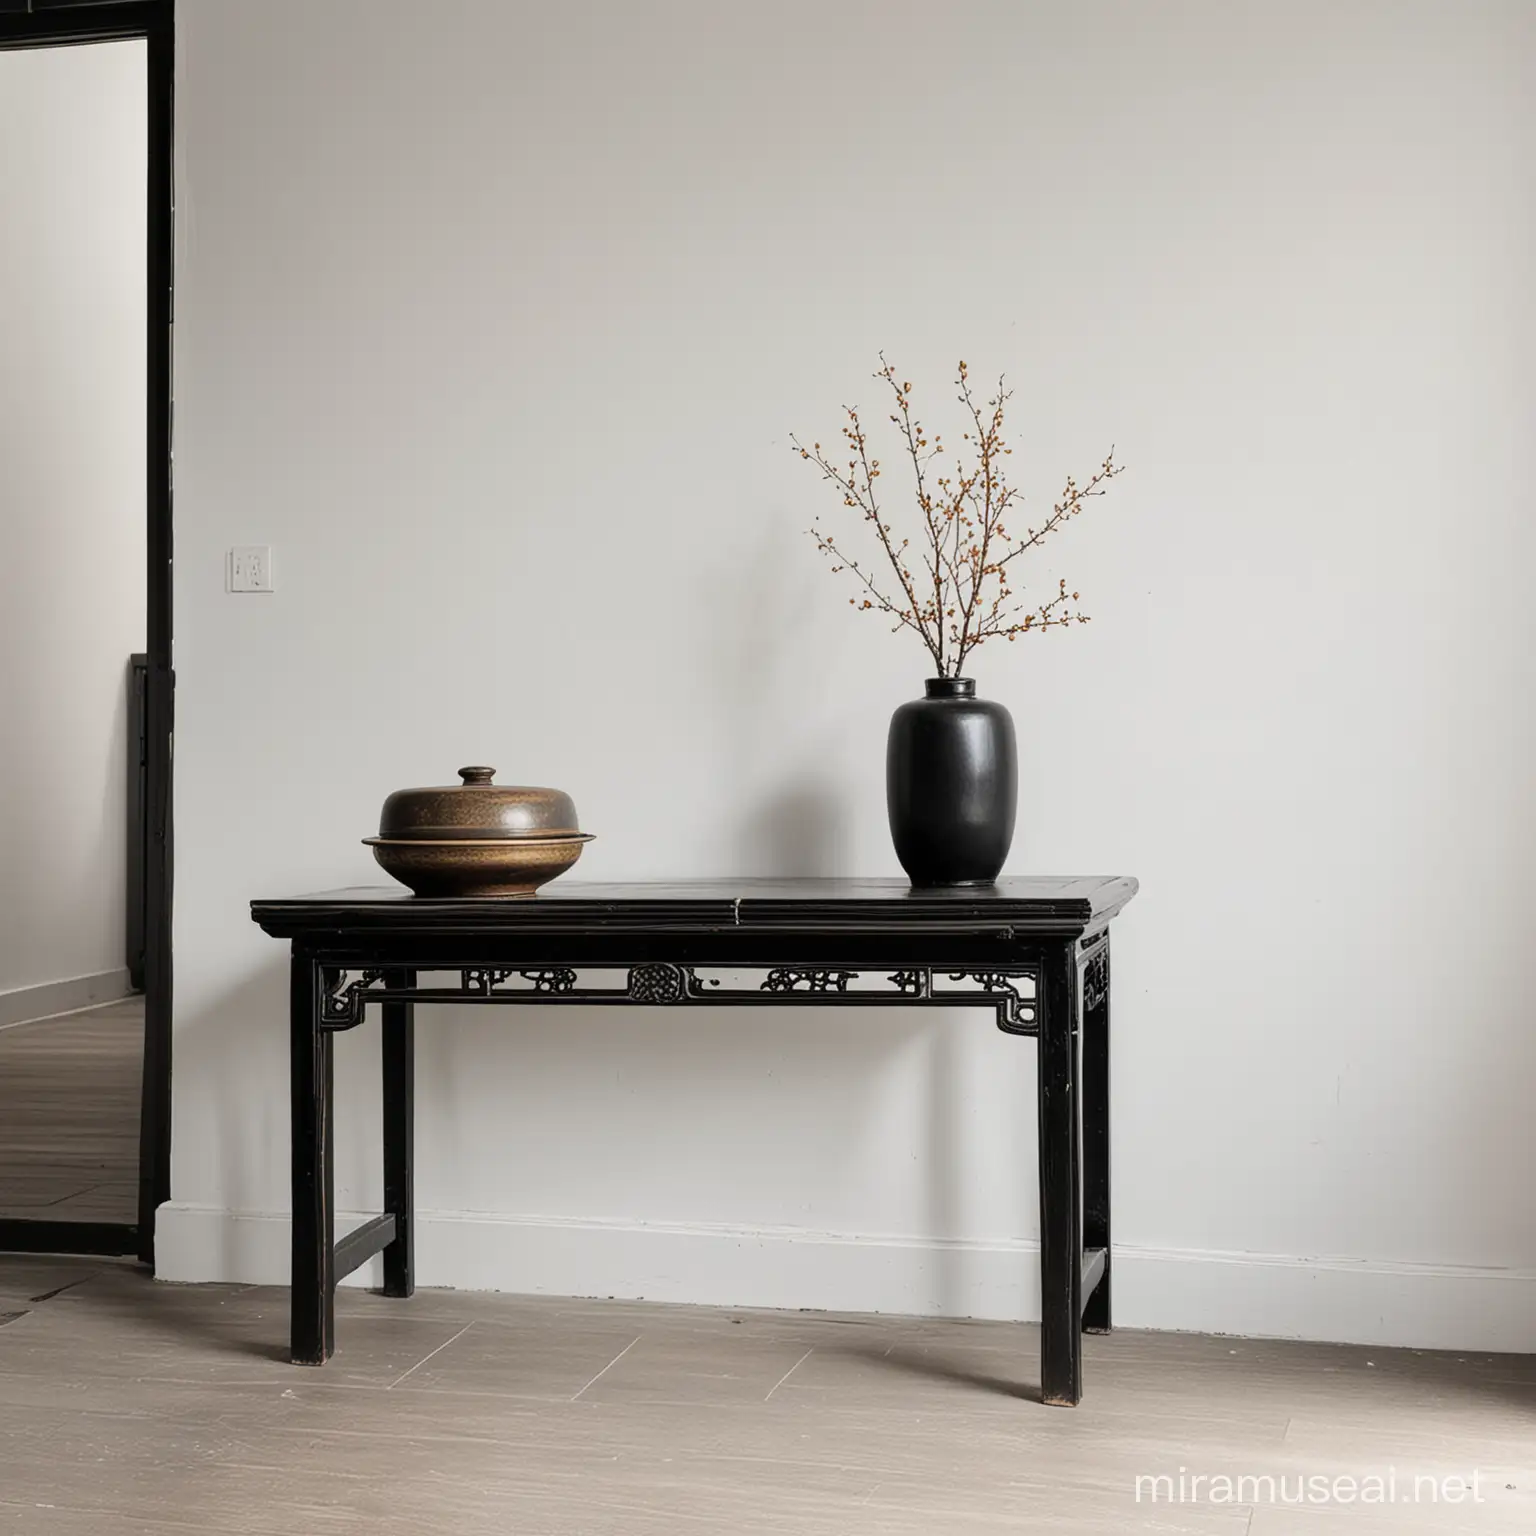 Elegant Black Chinese Table Against White Wall in Hallway